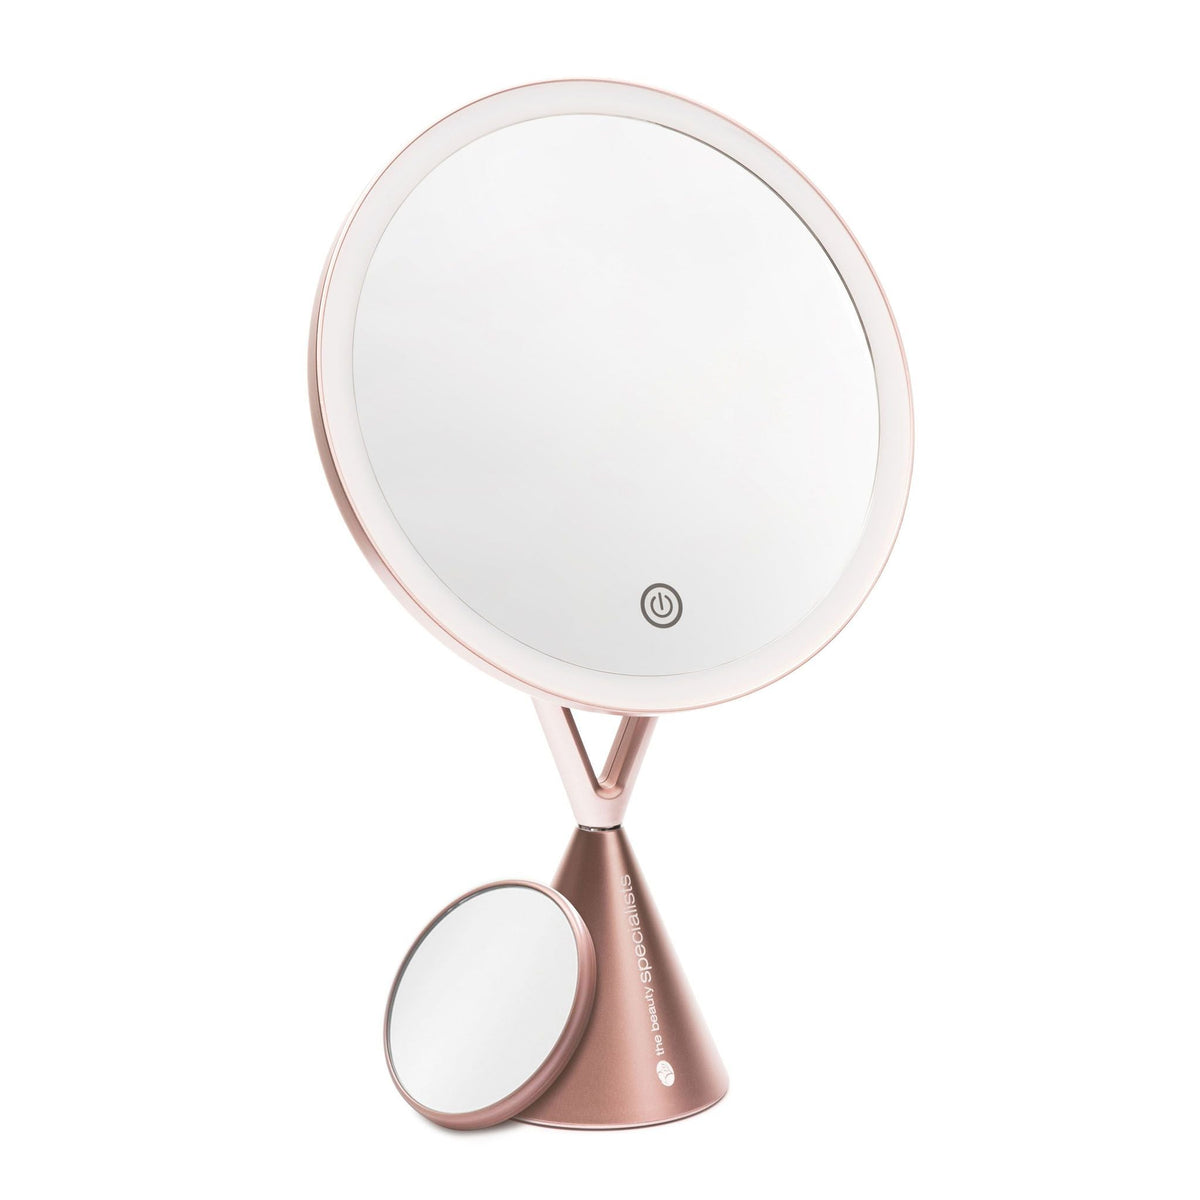 Rose gold HD illuminated make up mirror with detachable compact 1x and 5x magnifying mirror